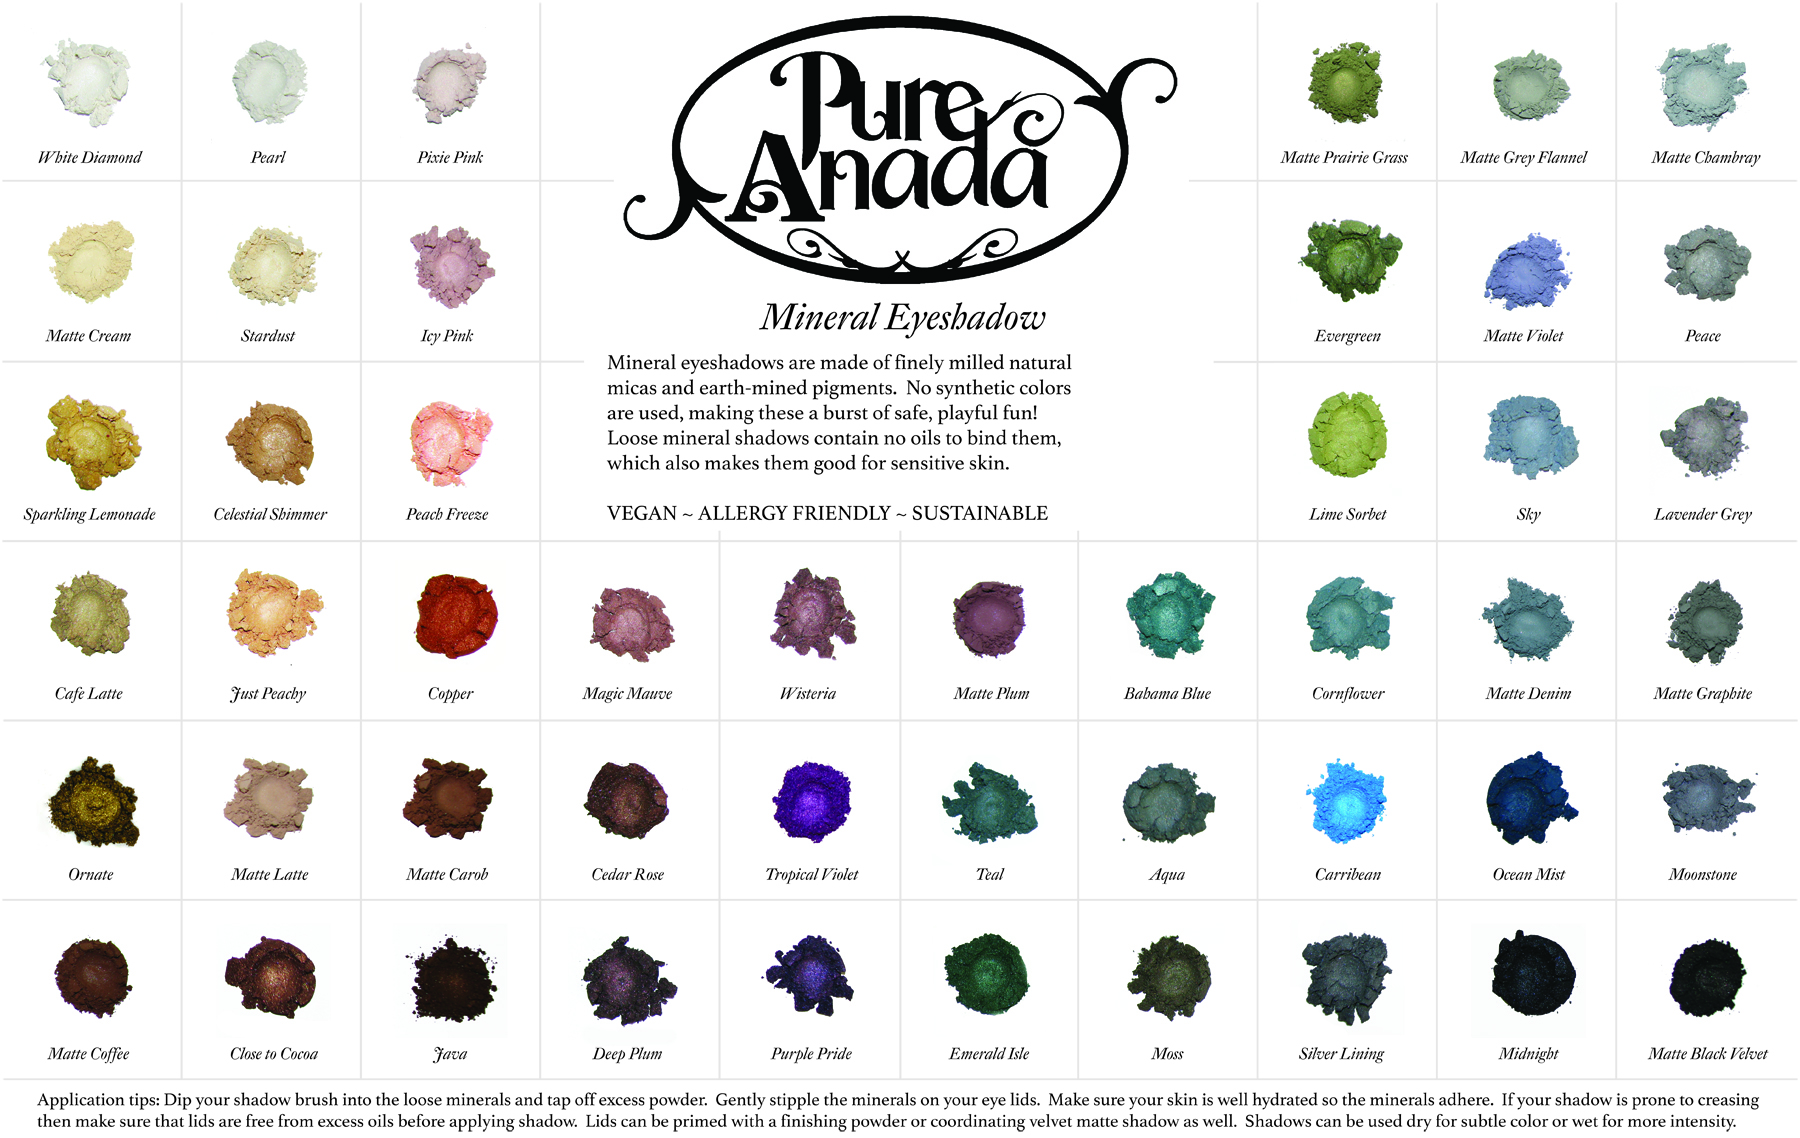 Pure Anada loose mineral eyeshadow color chart